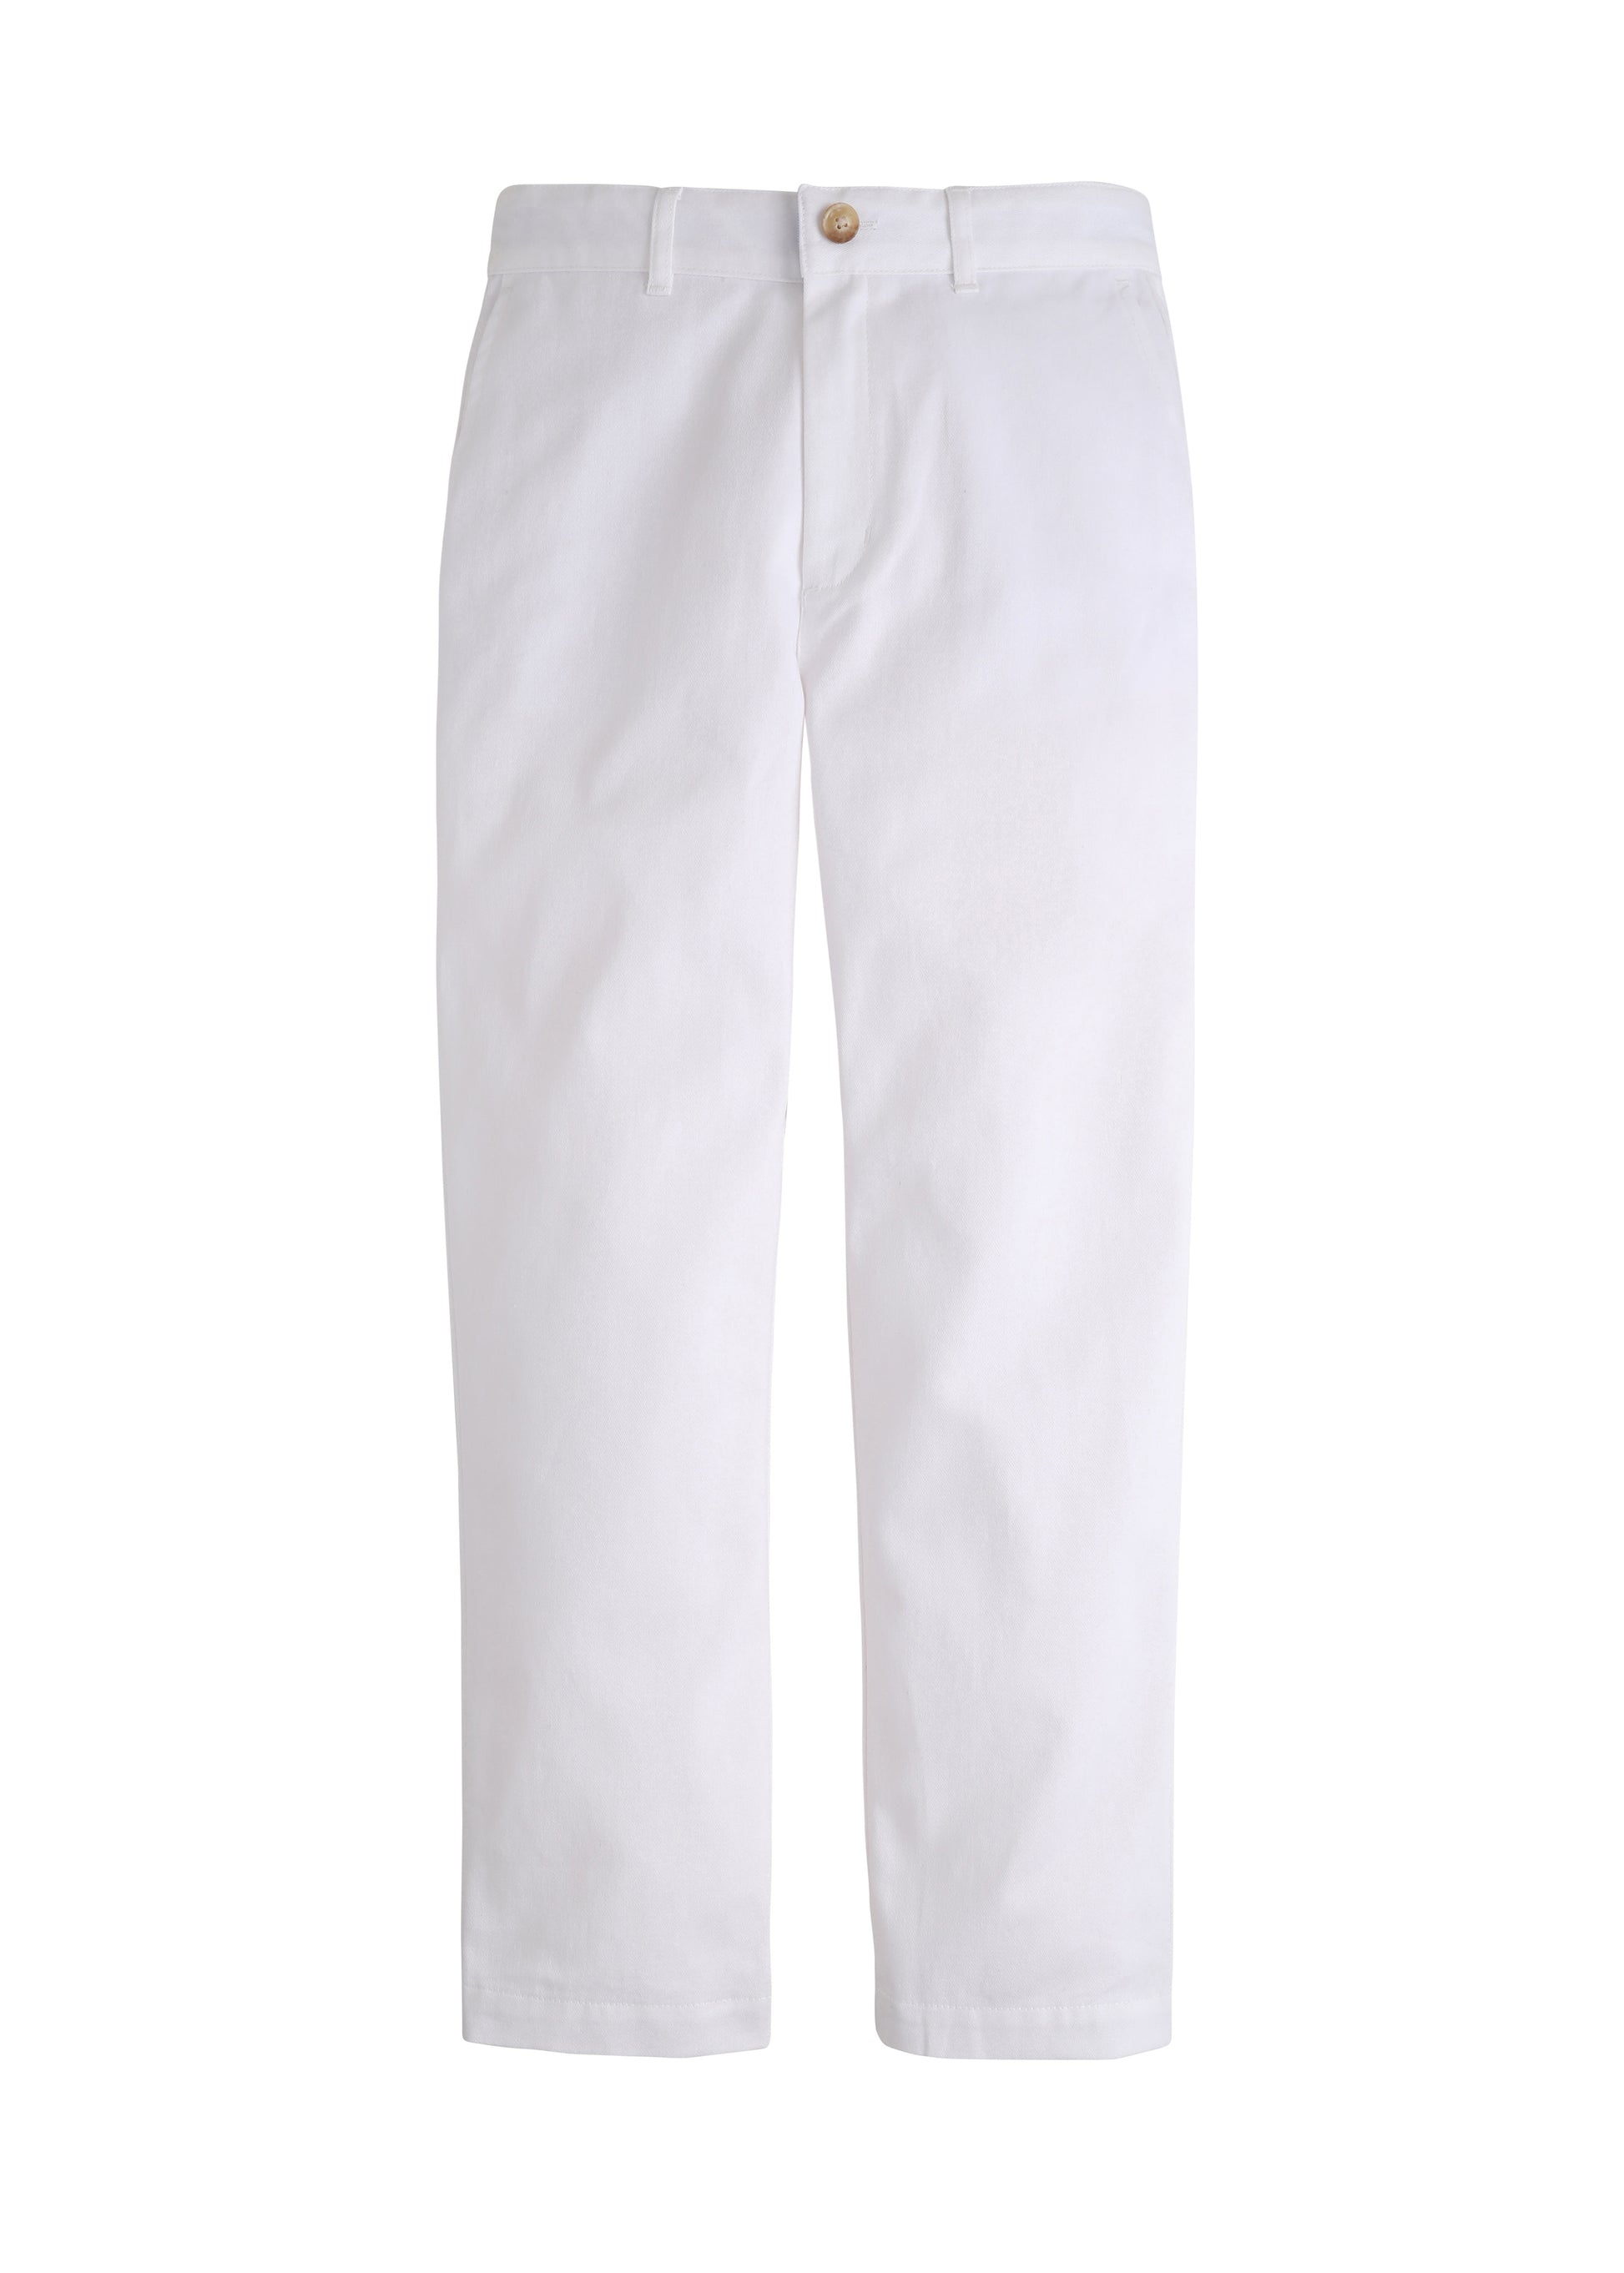 Classic Pant in White Twill by Little English